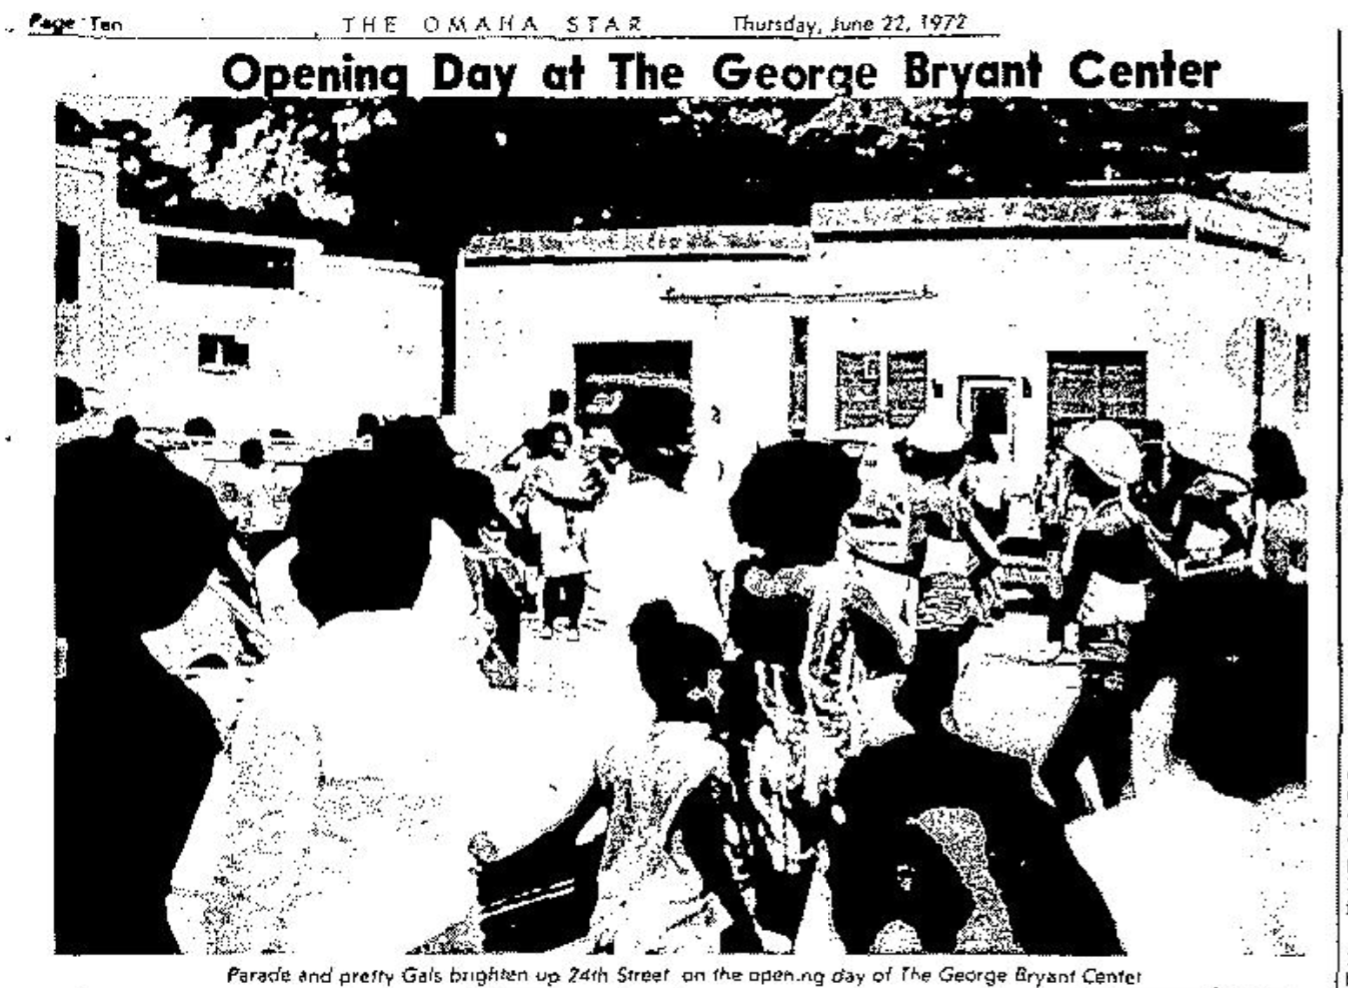 Entitled "Opening day at the George Bryant Center," this pic is from the June 22, 1972 edition of The Omaha Star.